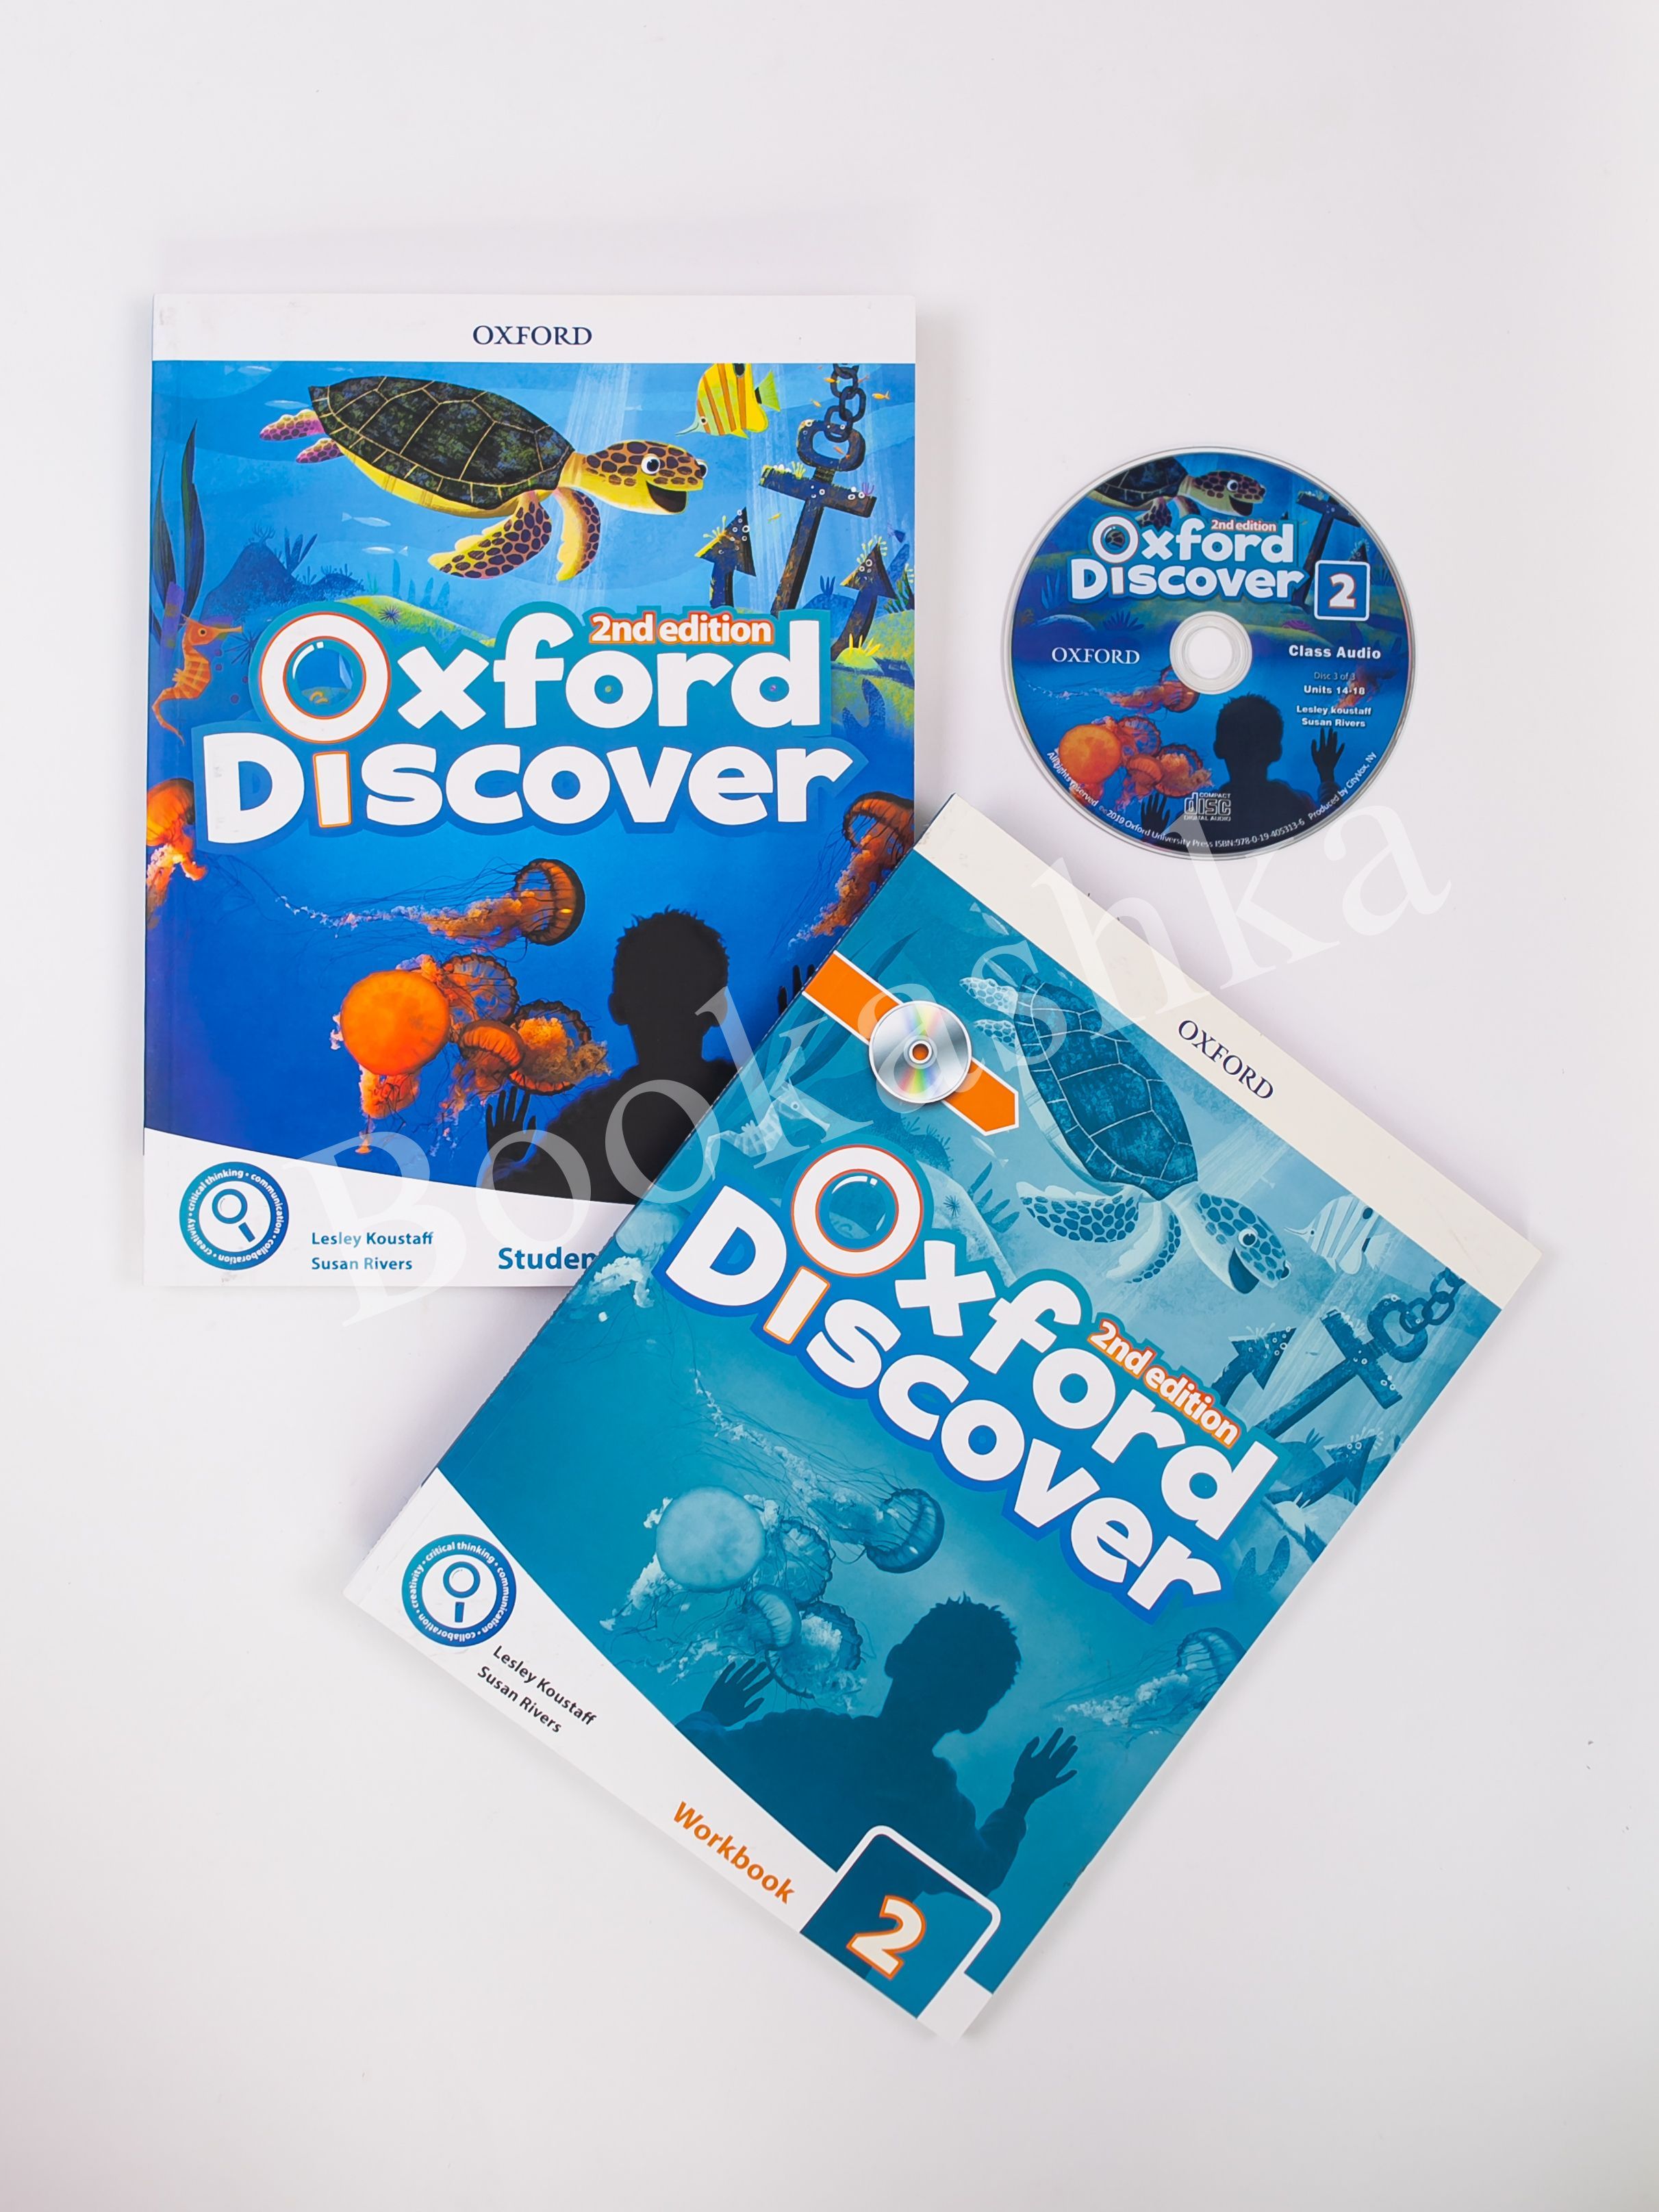 Oxford discover audio. Oxford discover 2. Учебник Oxford discover. Учебники английского языка Оксфорд. Oxford Discovery 6.